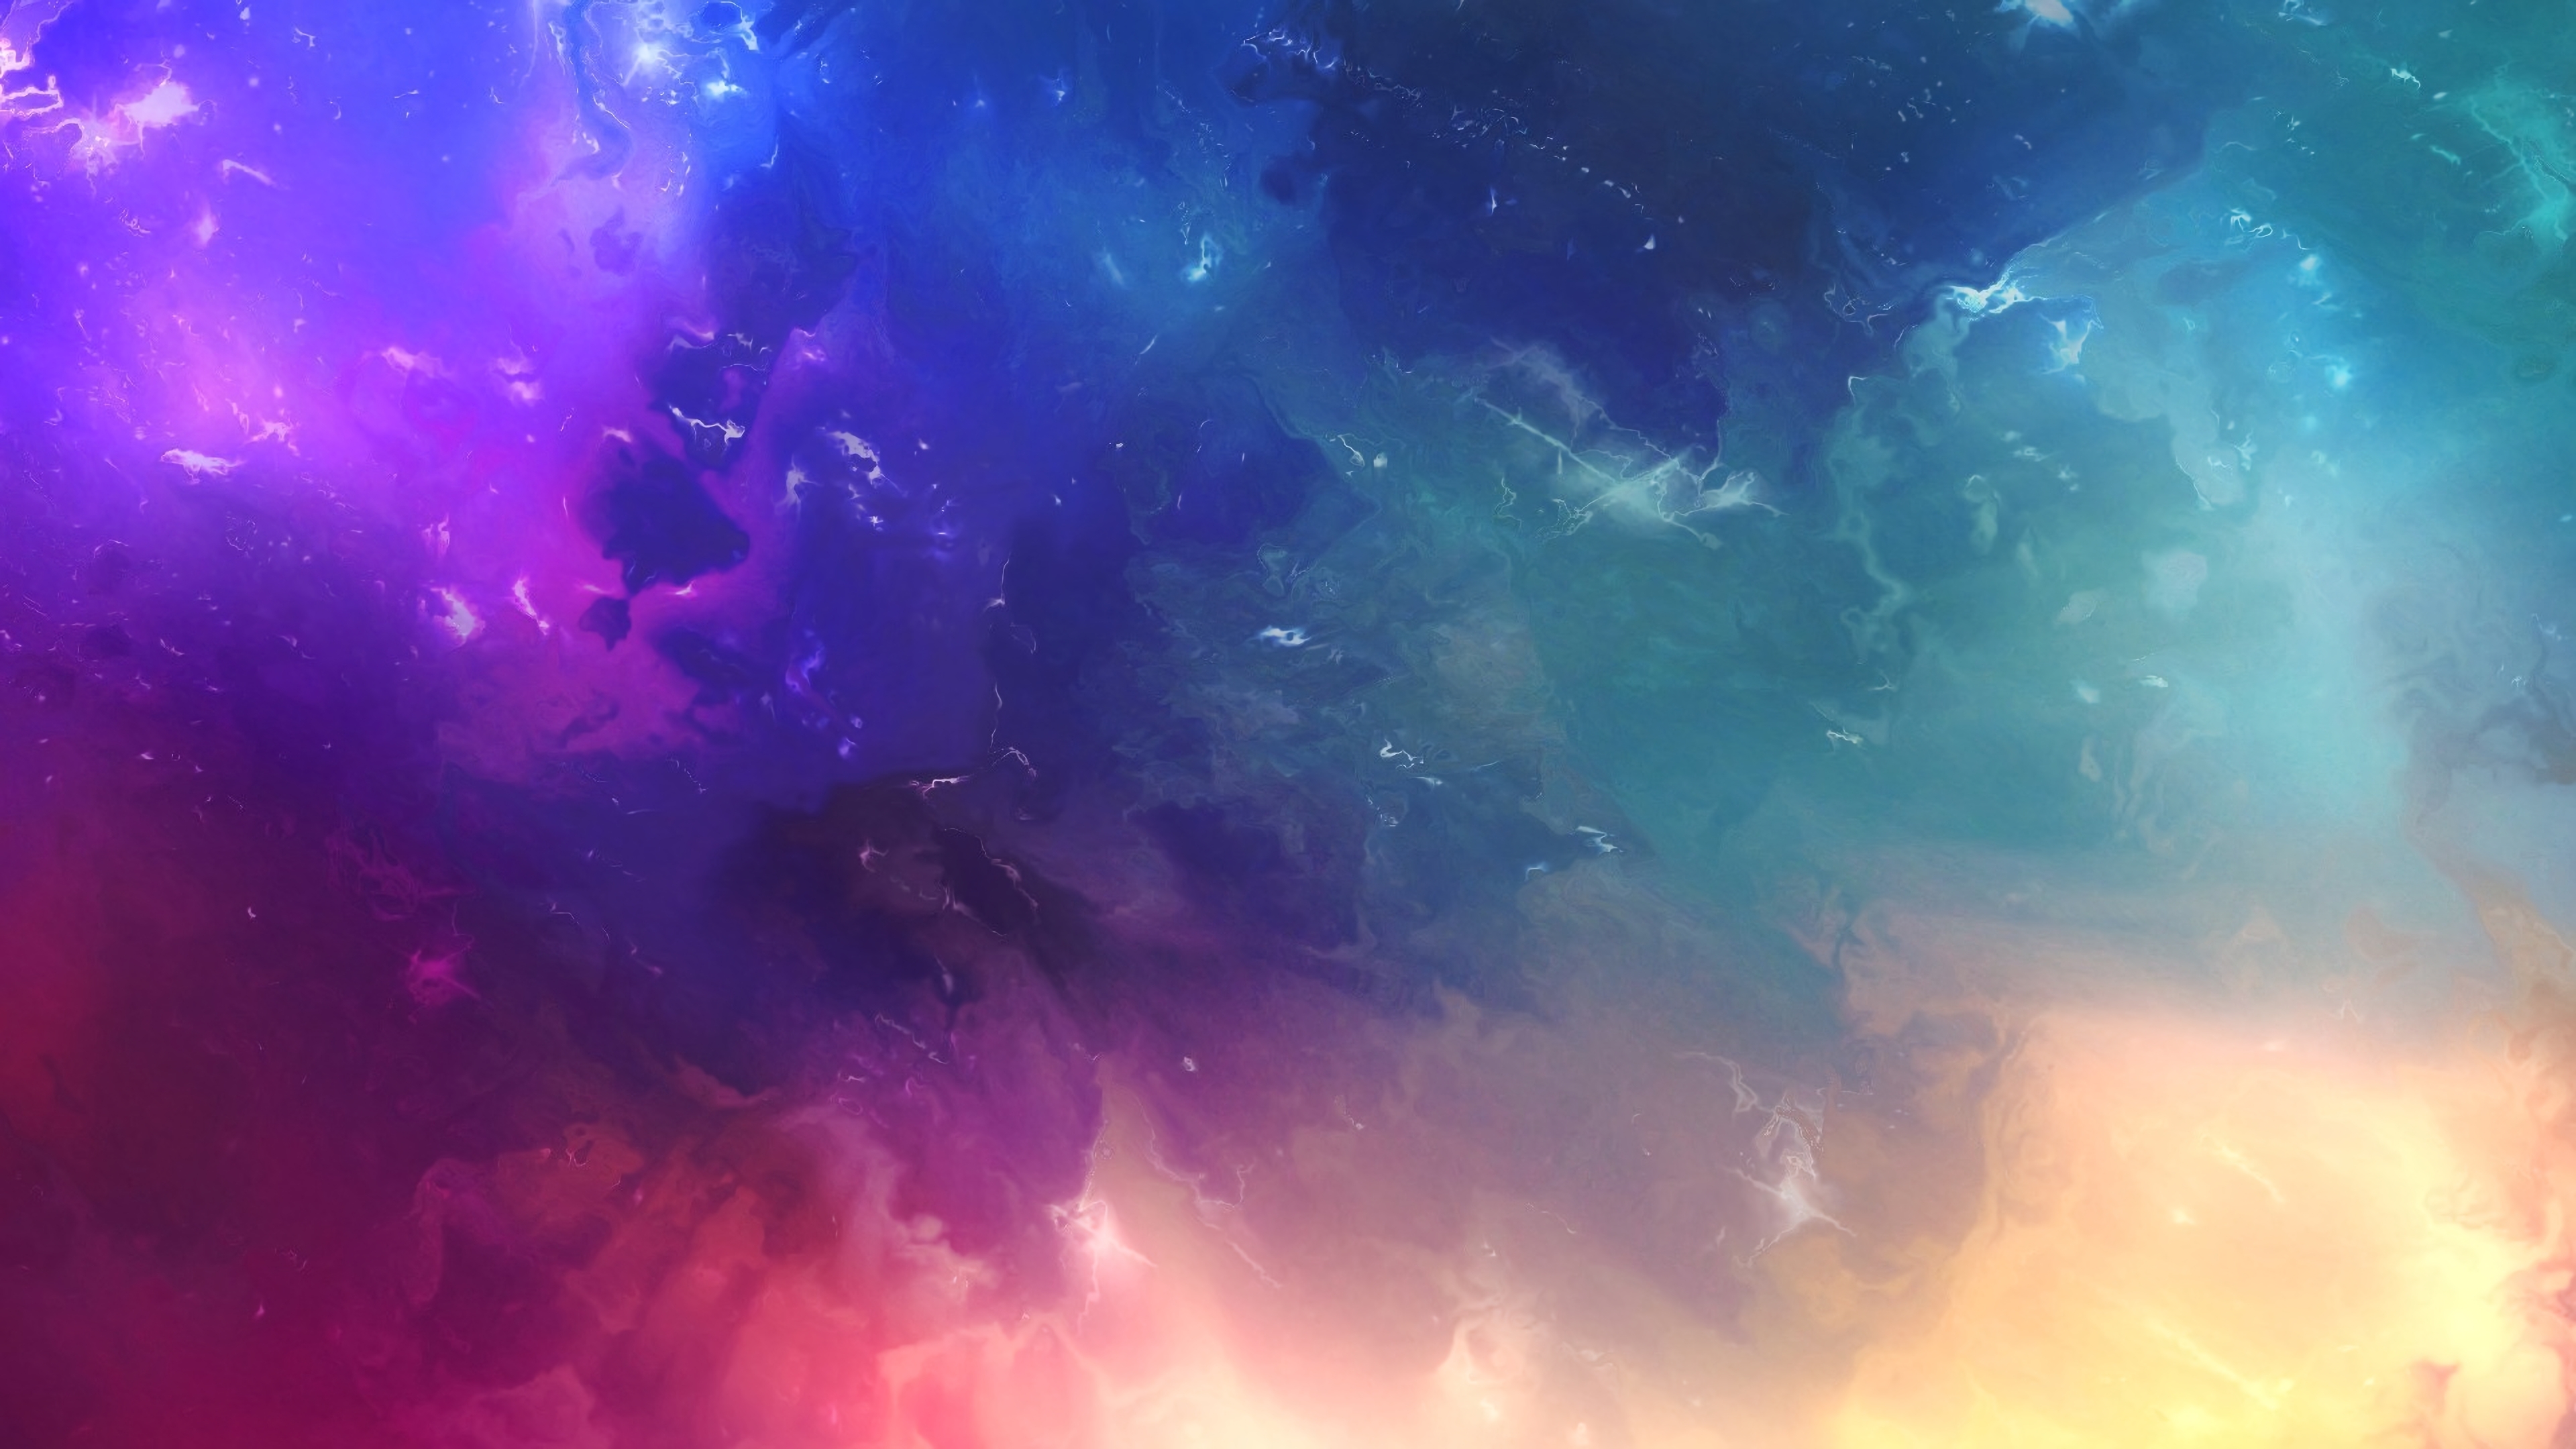 Colorful Space Wallpapers